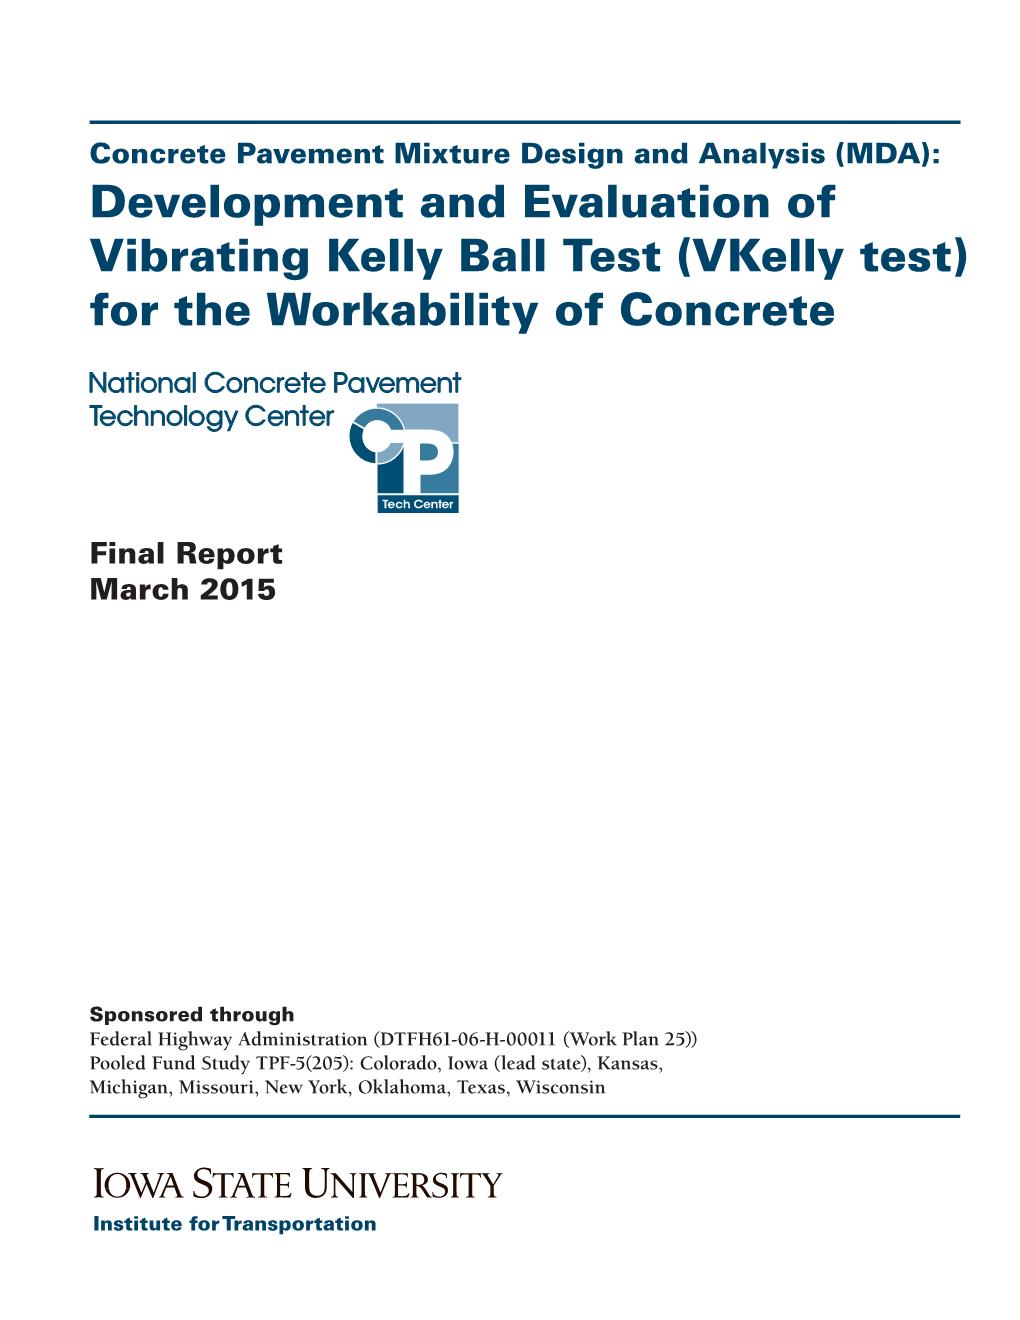 (MDA): Development and Evaluation of Vibrating Kelly Ball Test (Vkelly Test) for the Workability of Concrete